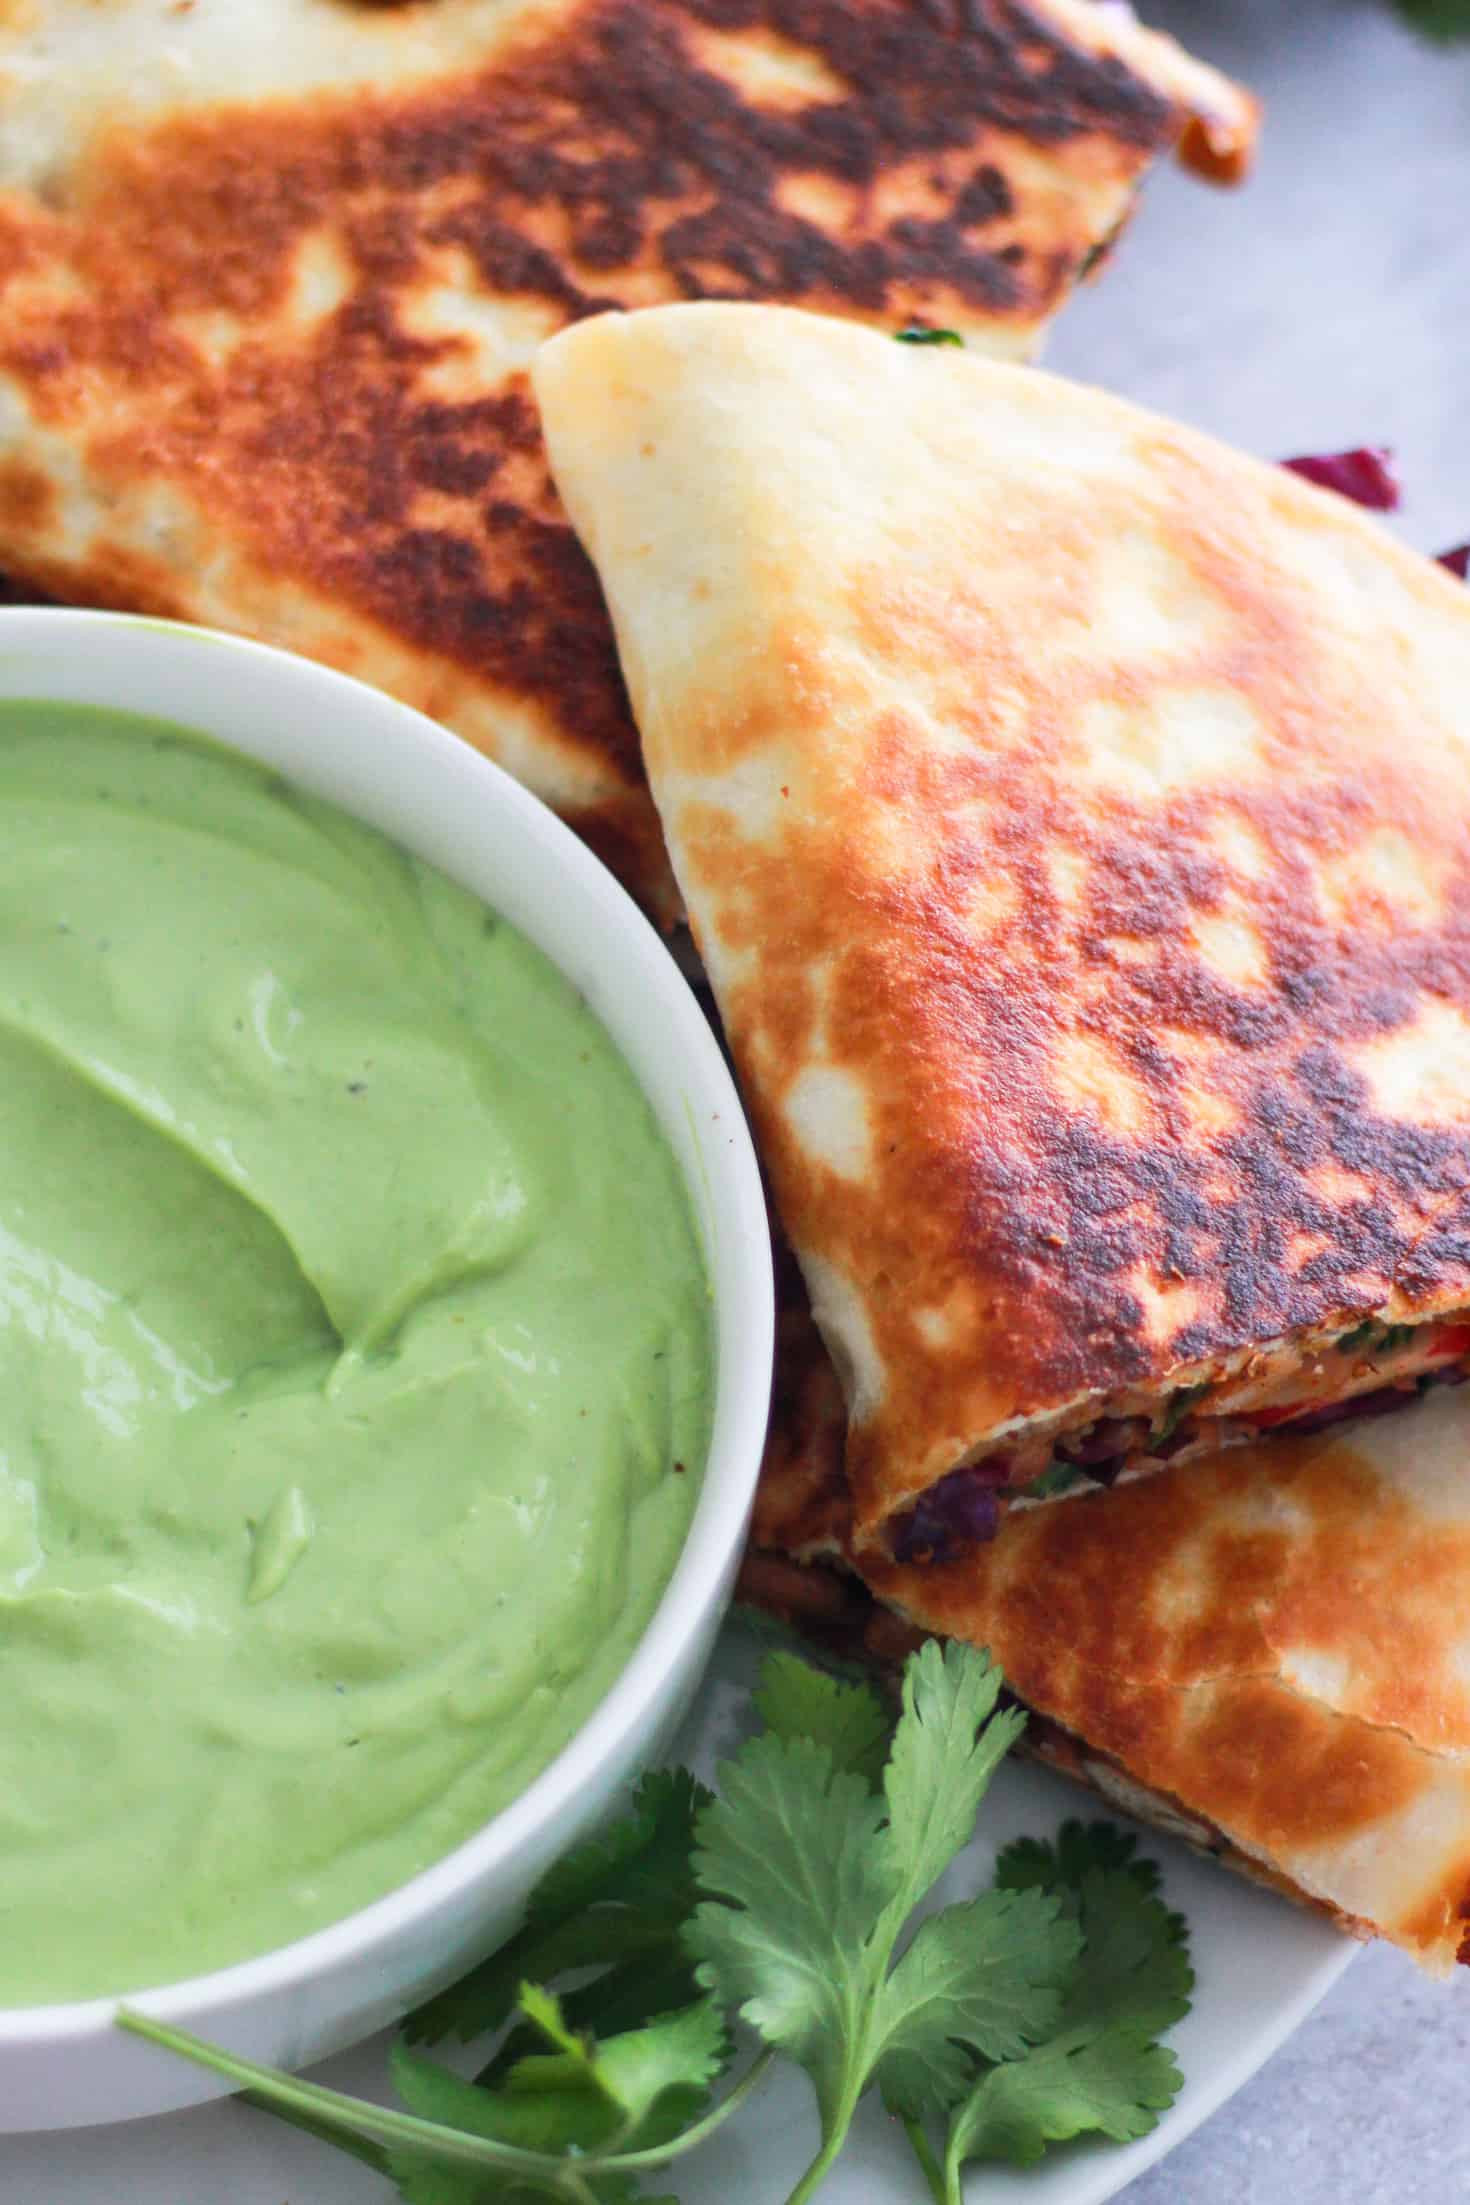 Bean quesadilla on a plate with avocado dipping sauce.